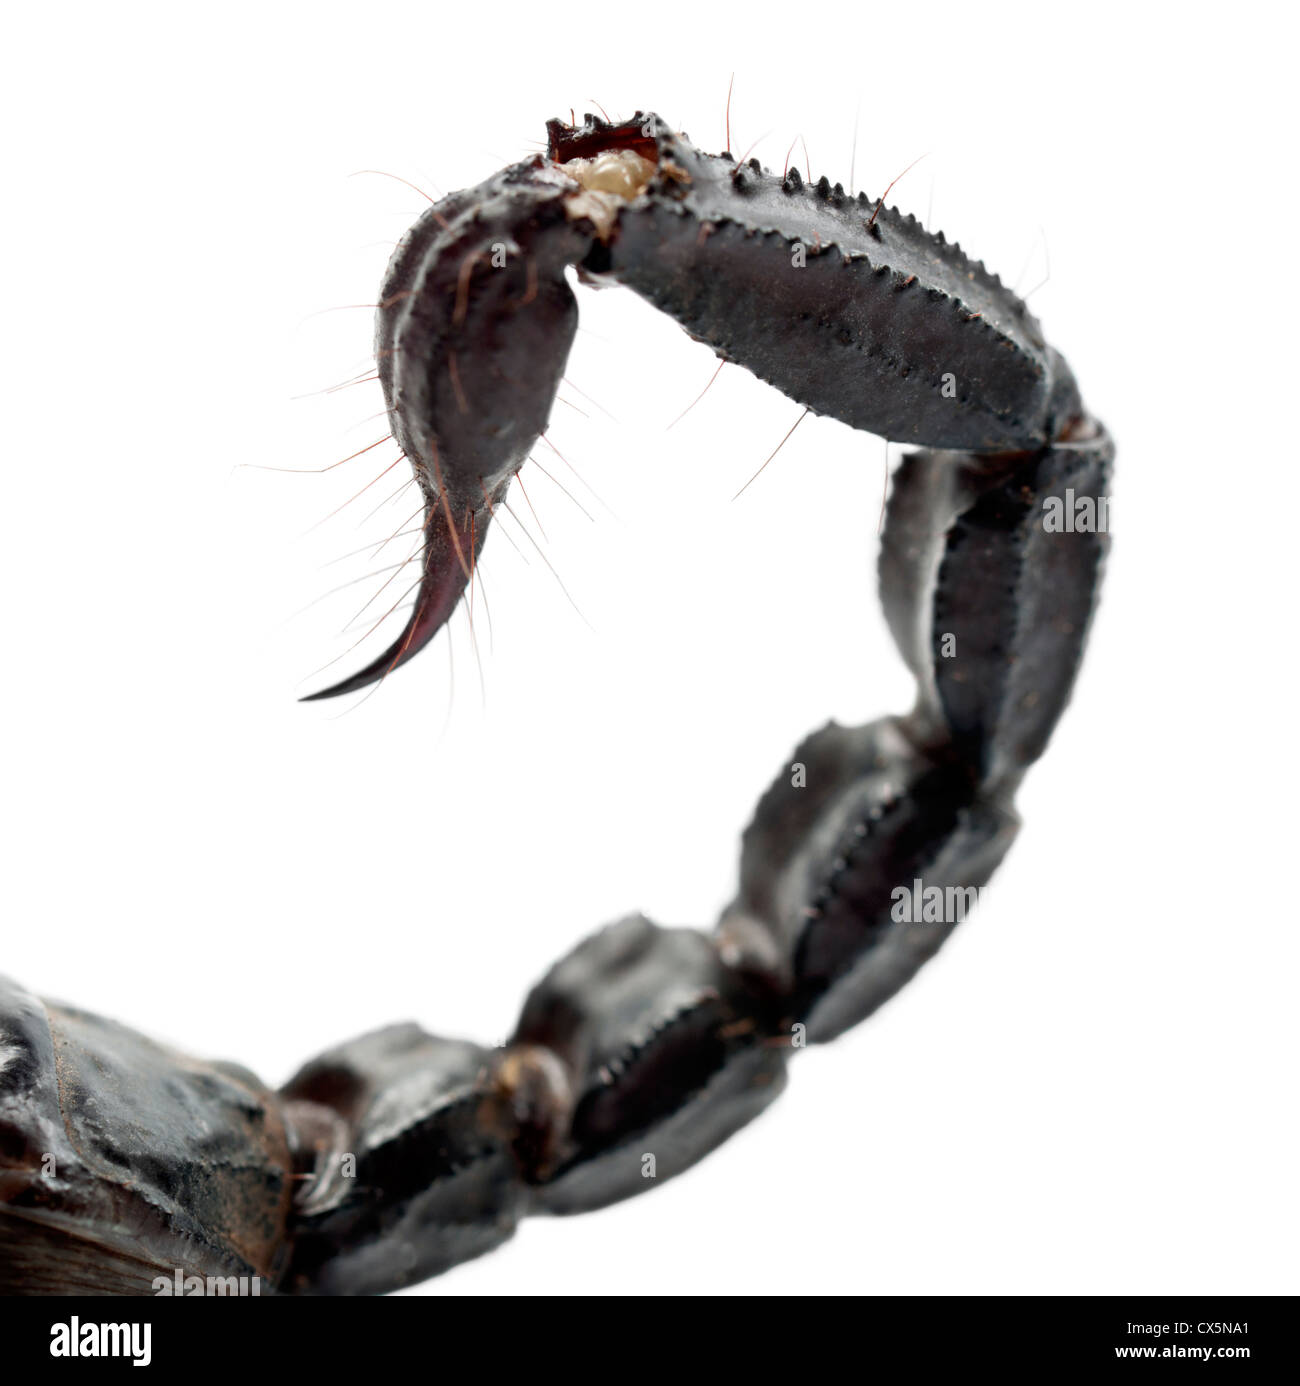 Emperor Scorpion, Pandinus imperator, close up of tail against white background Stock Photo